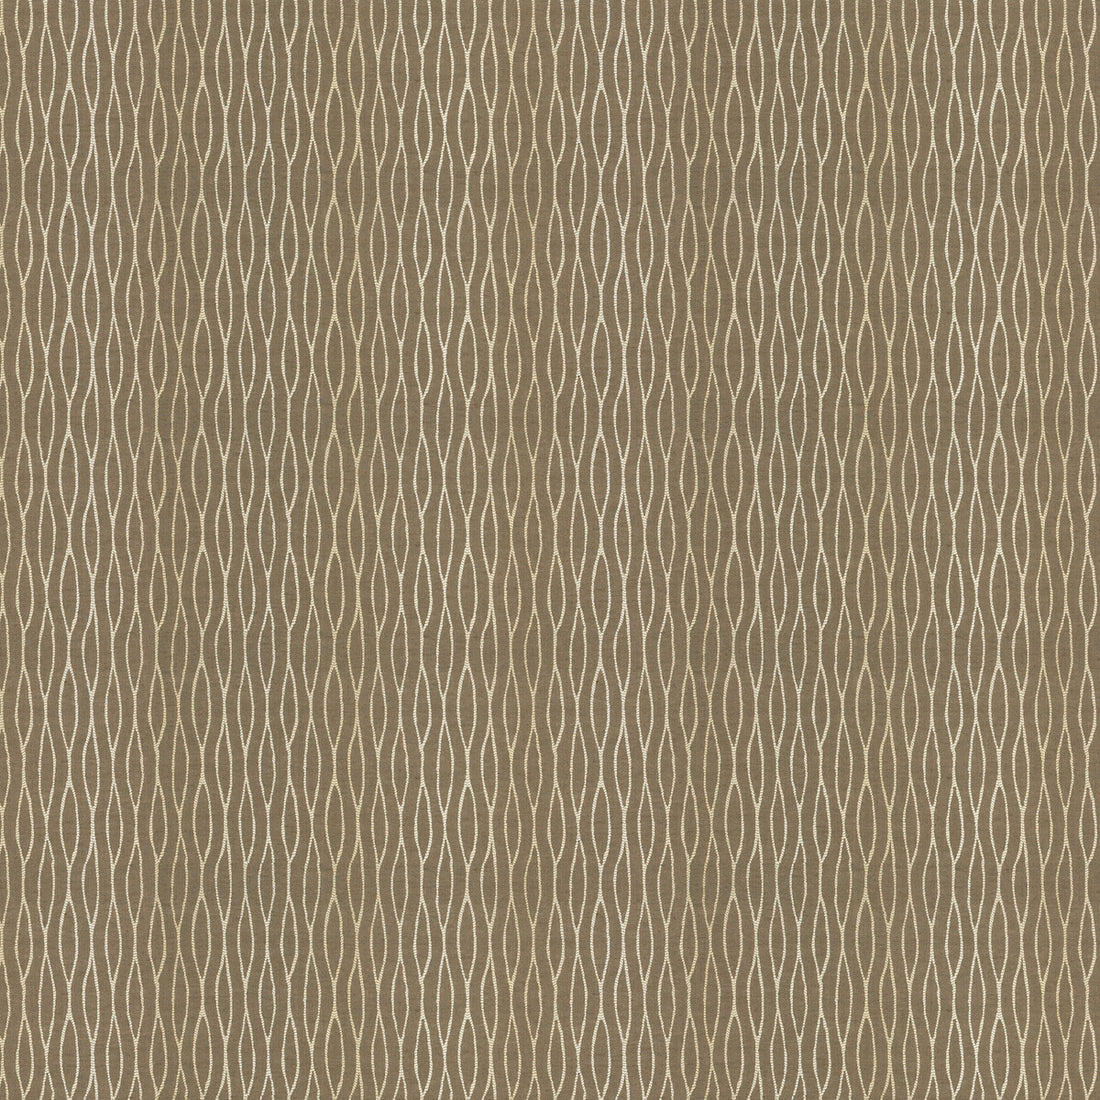 Waves Ombre fabric in natural color - pattern GWF-2925.61.0 - by Lee Jofa Modern in the Allegra Hicks II collection